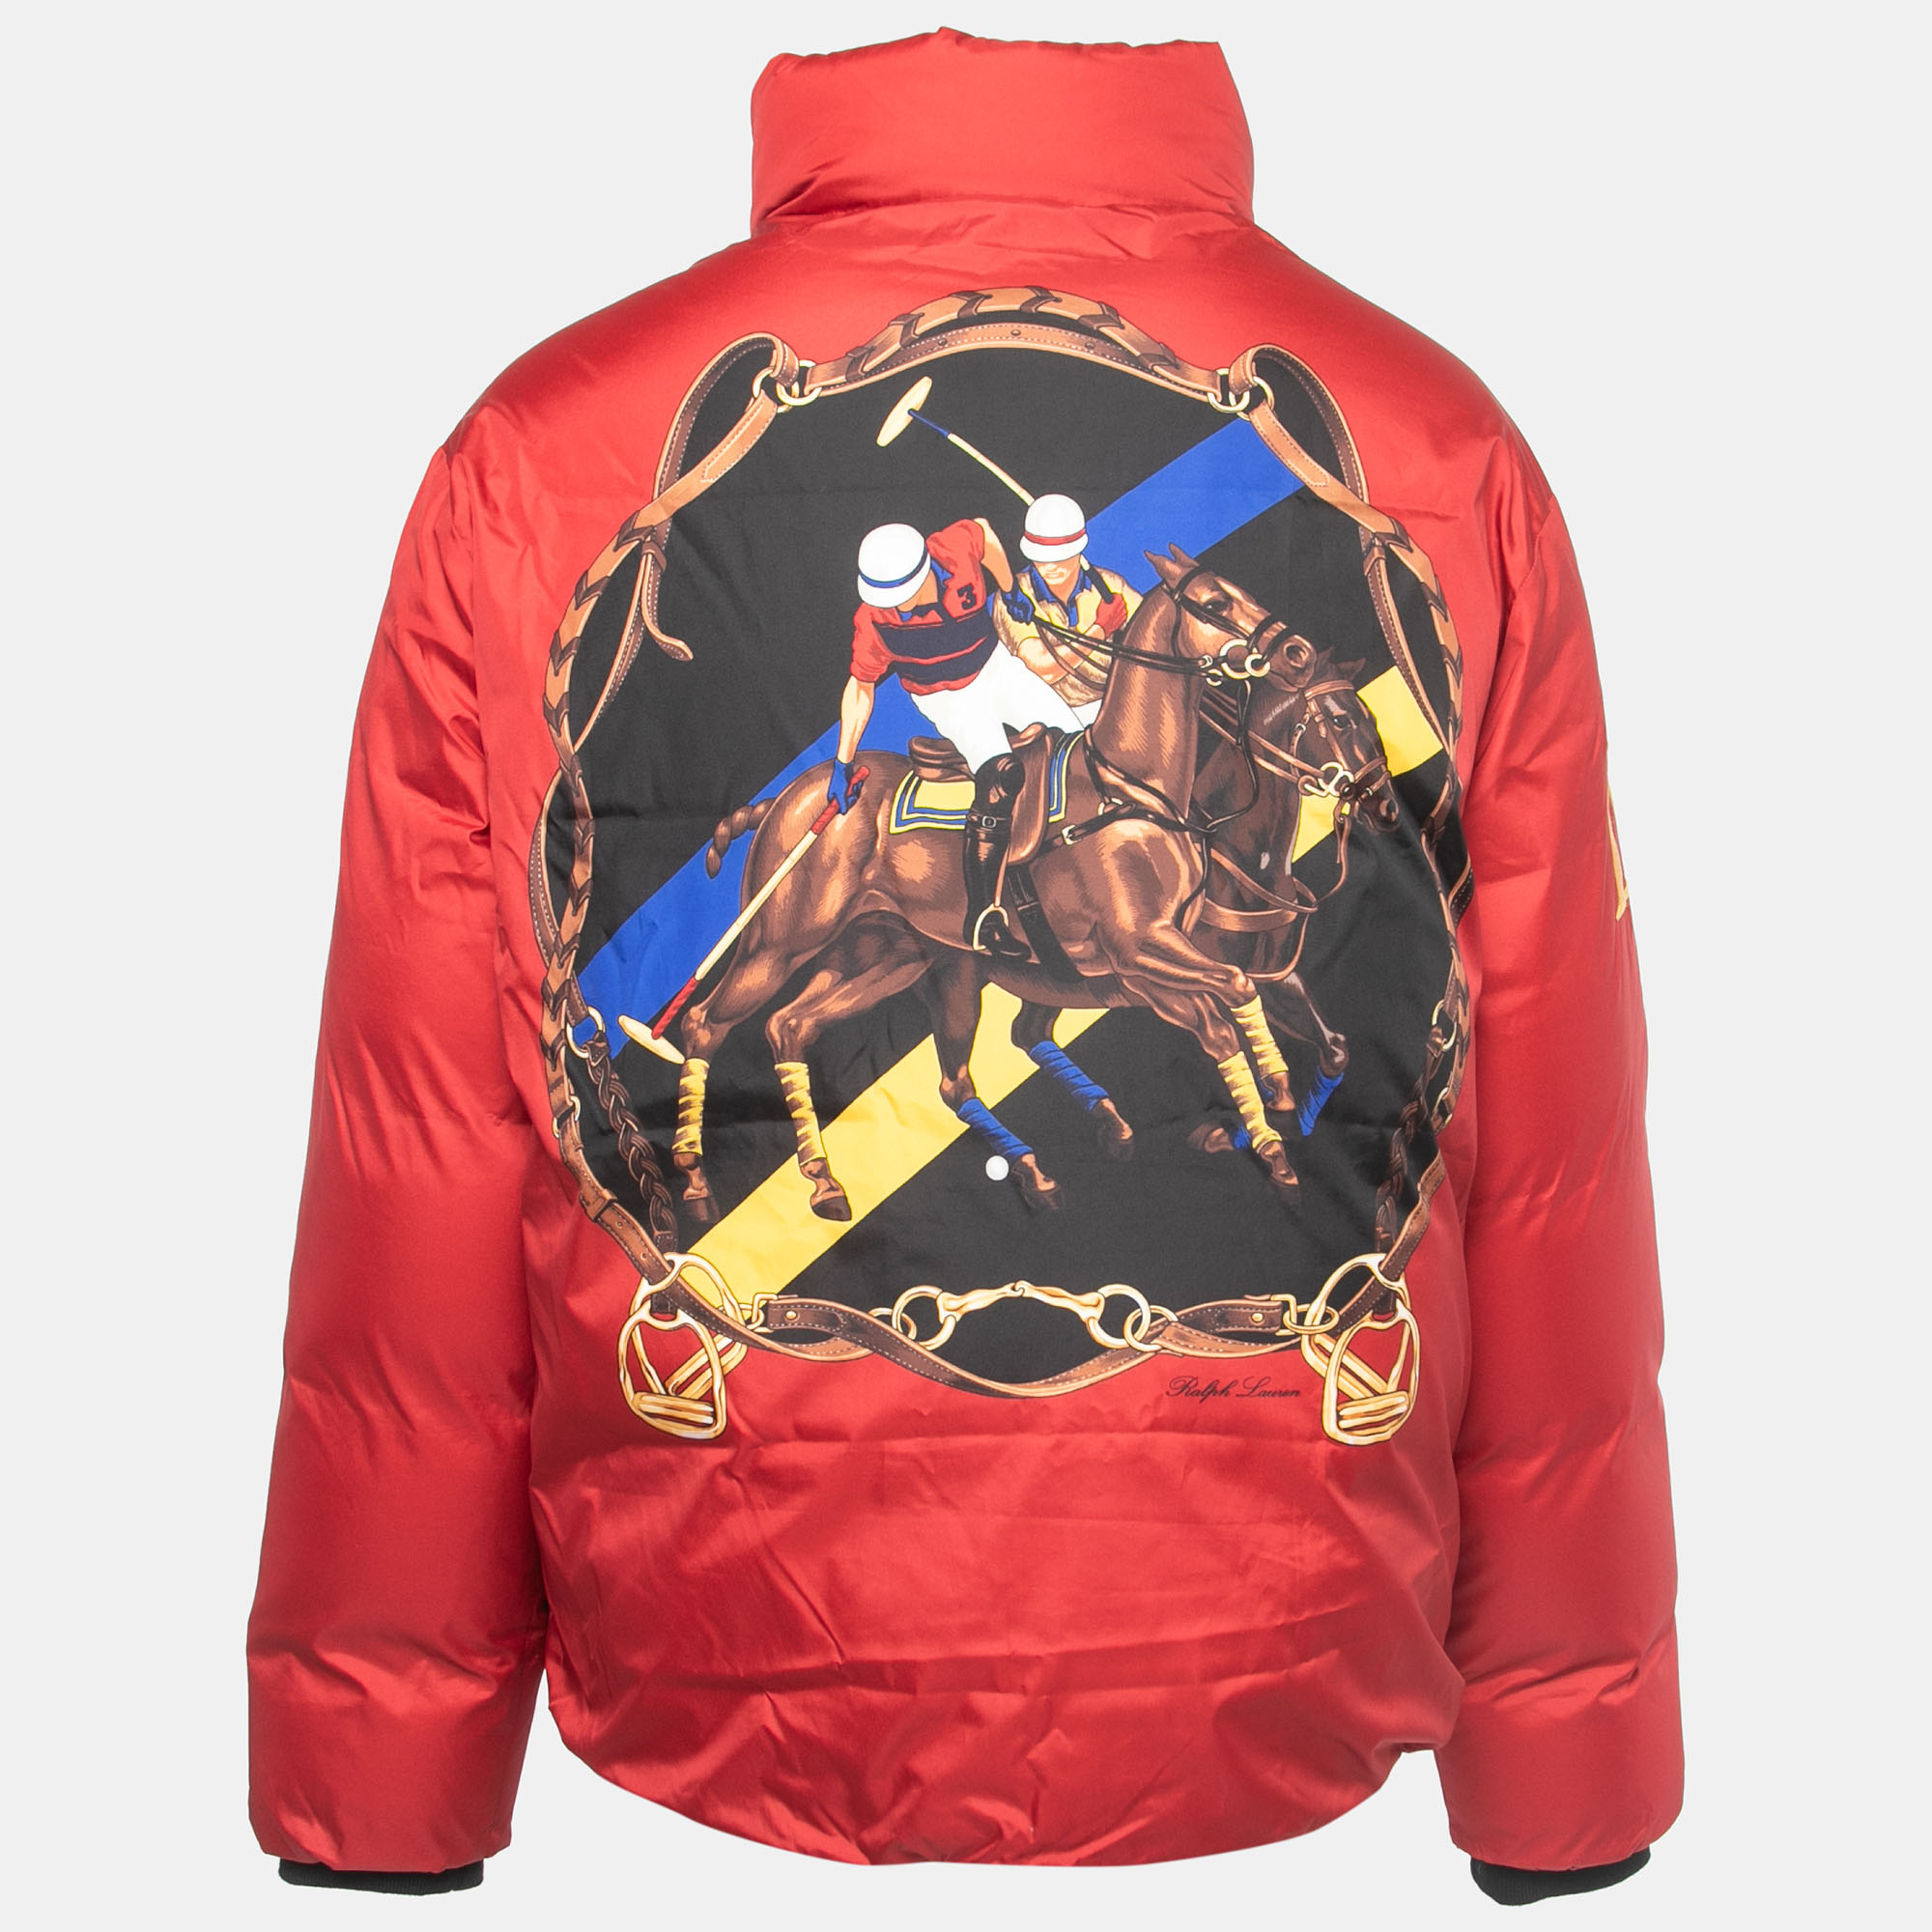 

Polo Ralph Lauren Red Printed Synthetic Puffer Jacket